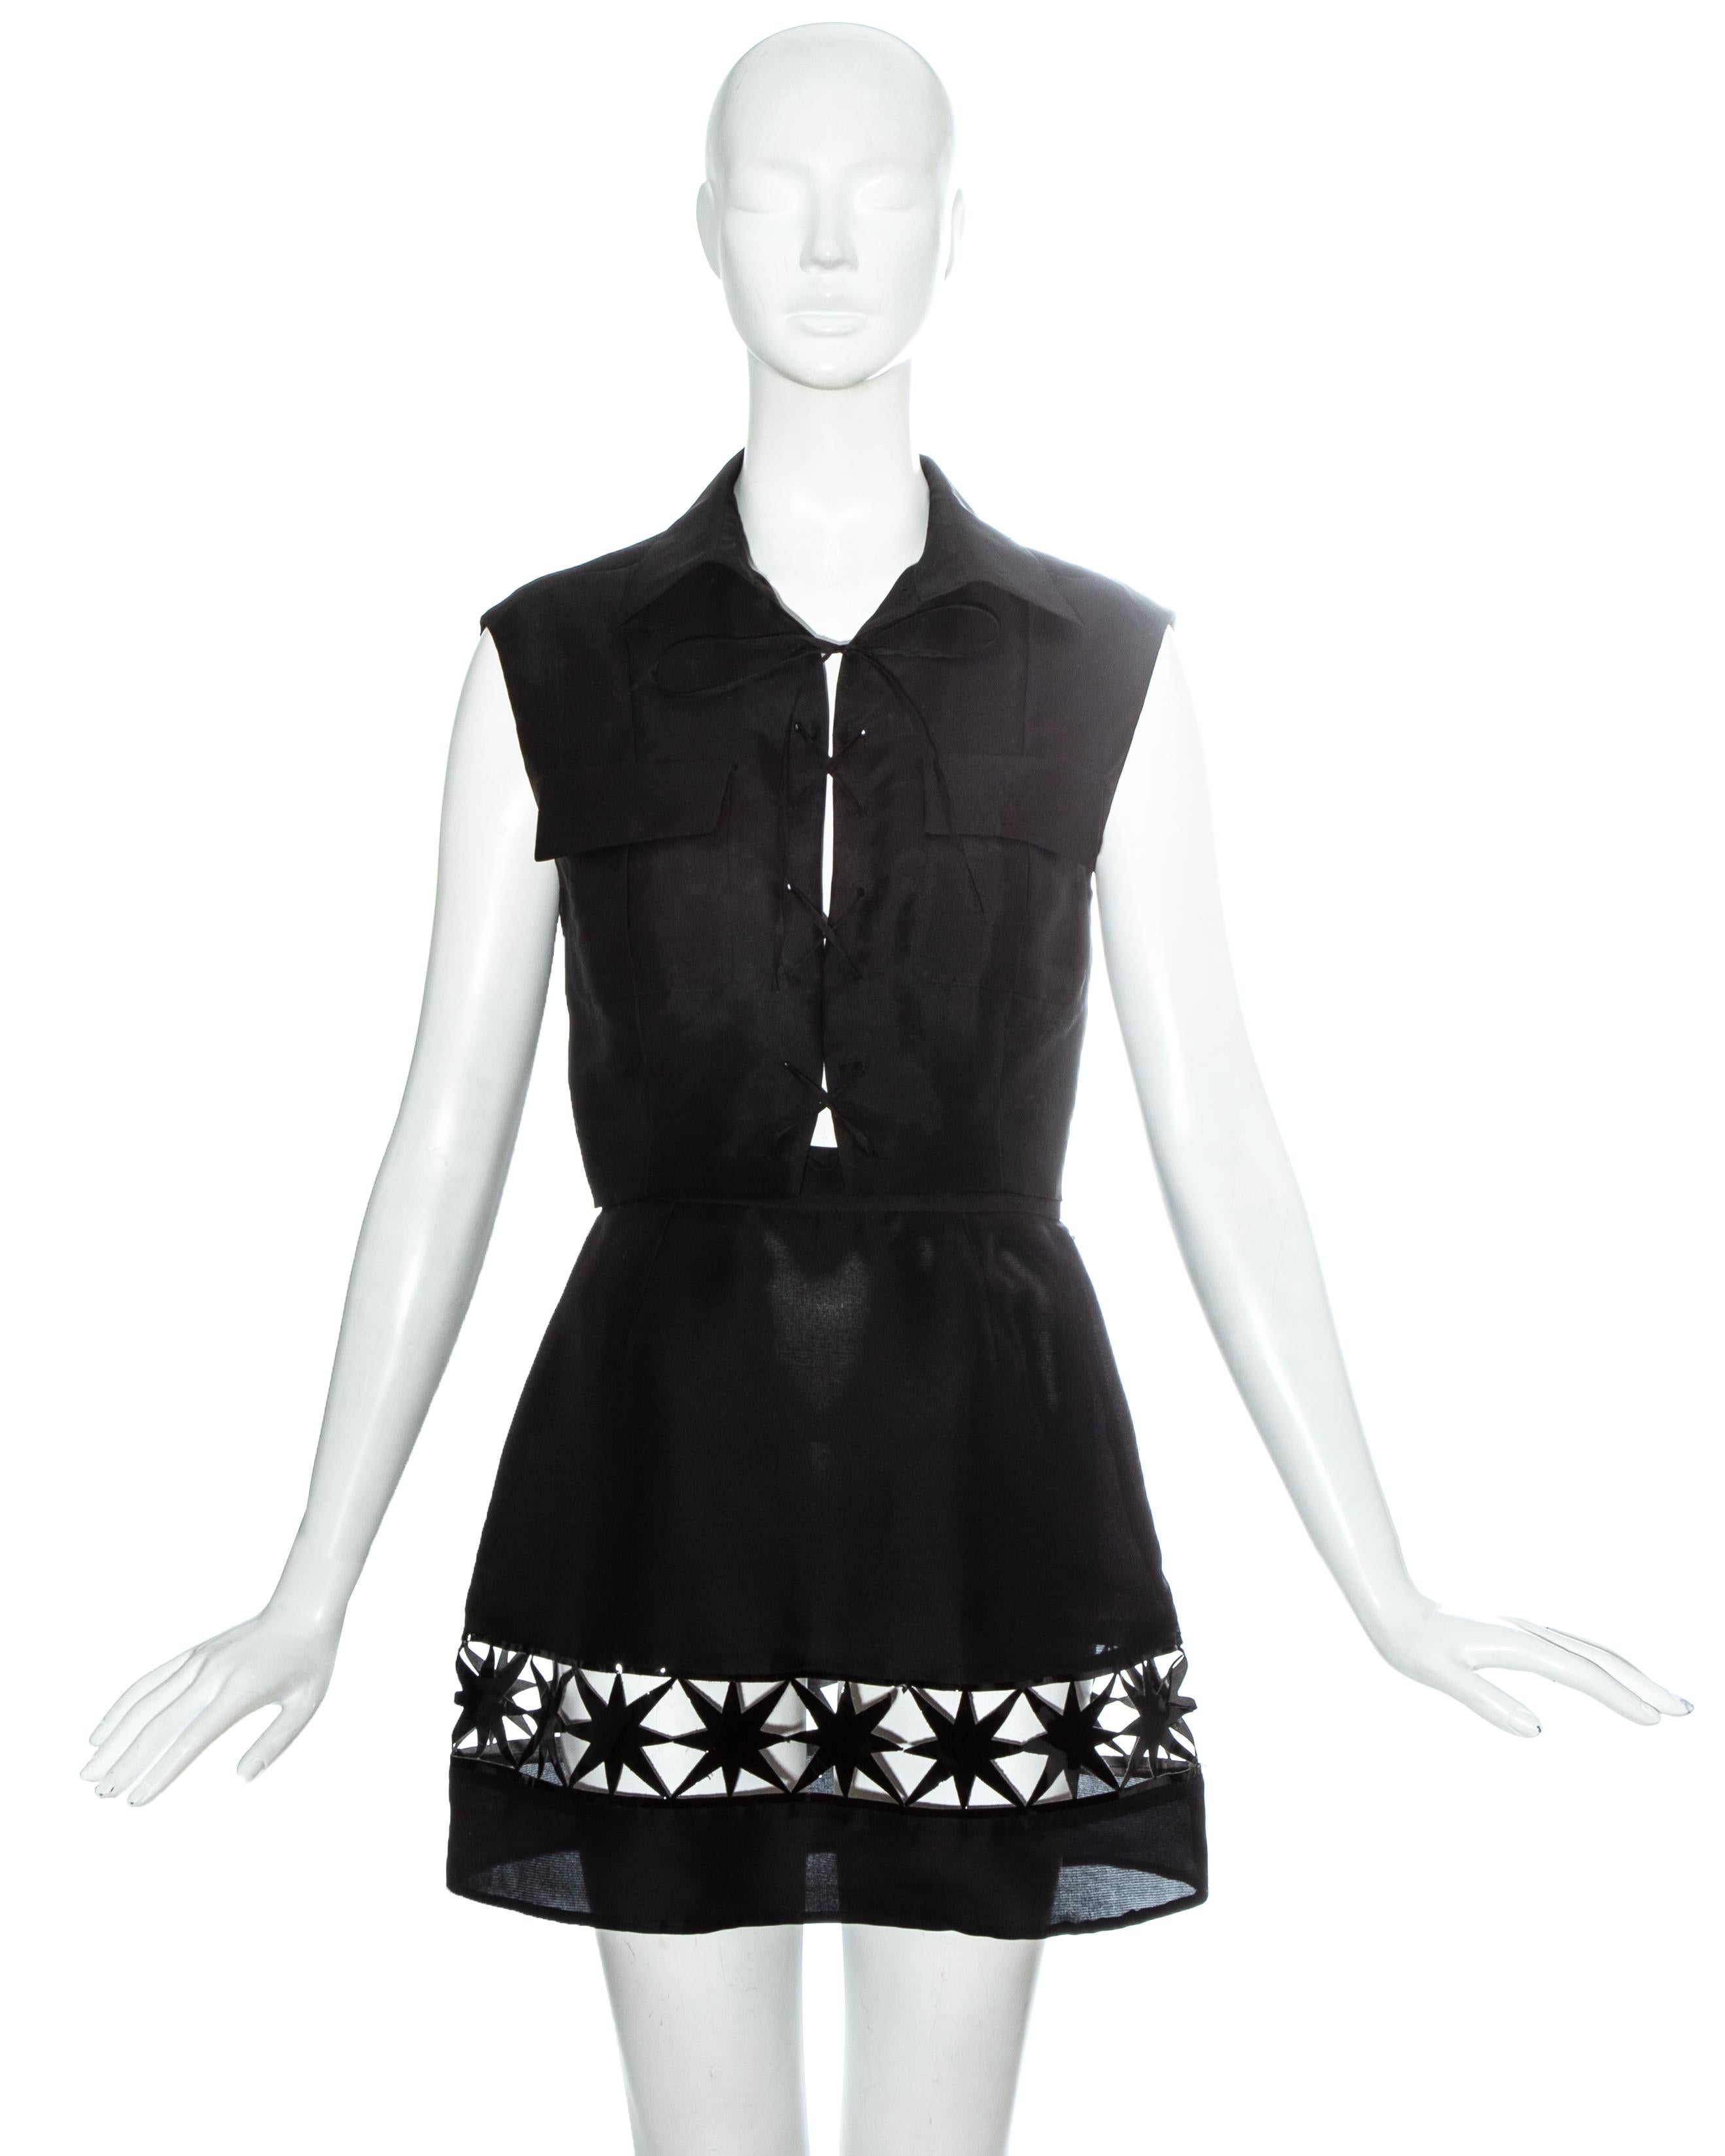 Prada black silk organza mini skirt and vest set. Safari style vest with two front flap pockets and lace up fastening. High waisted mini skirt with leather stars and cut out panel

Spring-Summer 1993